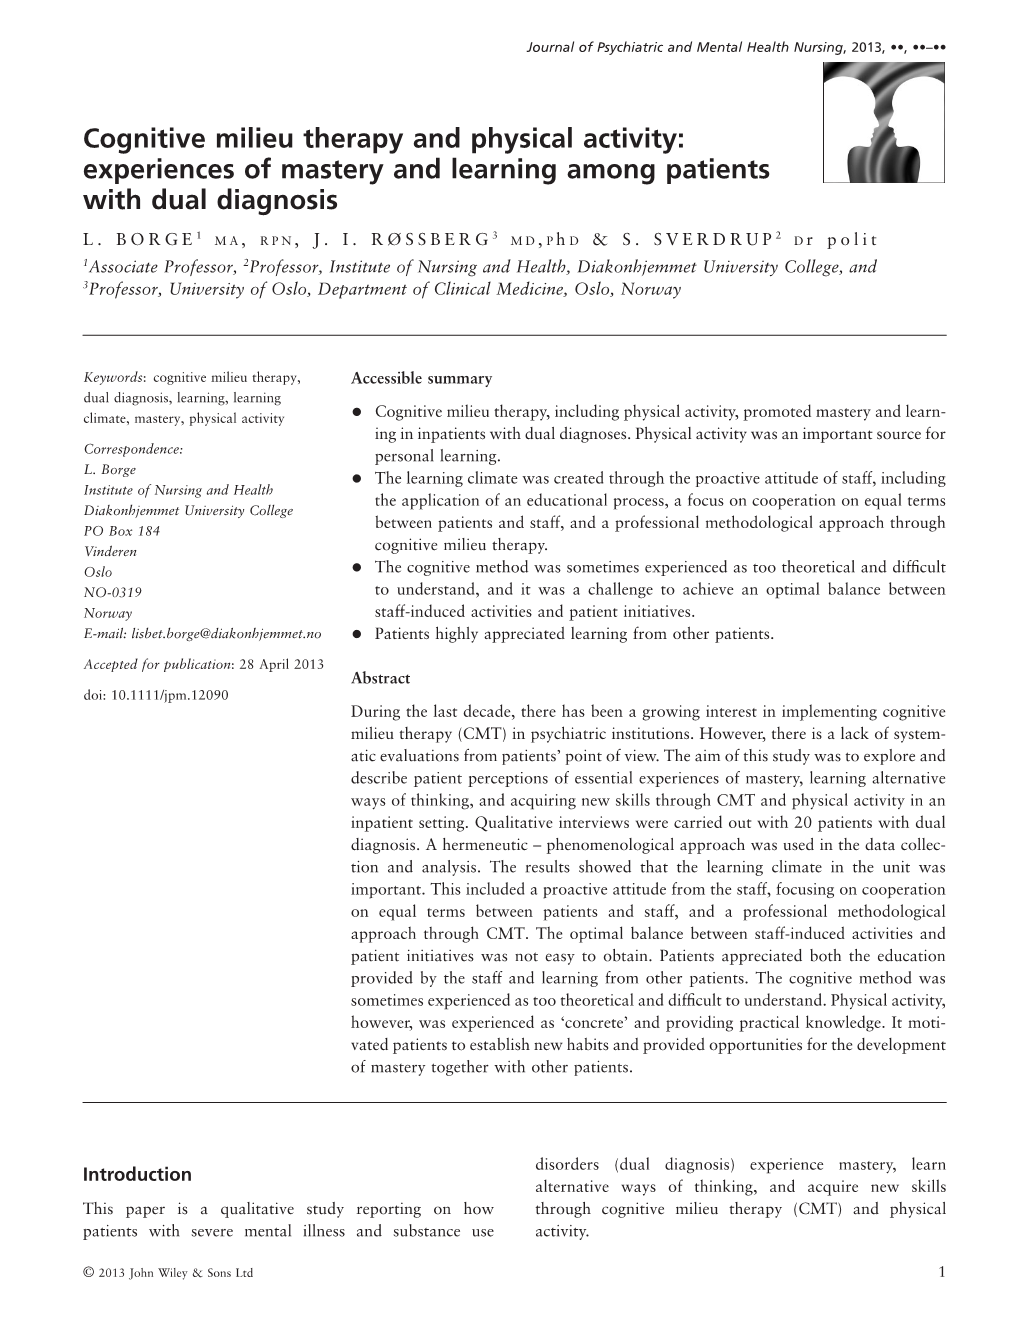 Cognitive Milieu Therapy and Physical Activity: Experiences of Mastery and Learning Among Patients with Dual Diagnosis